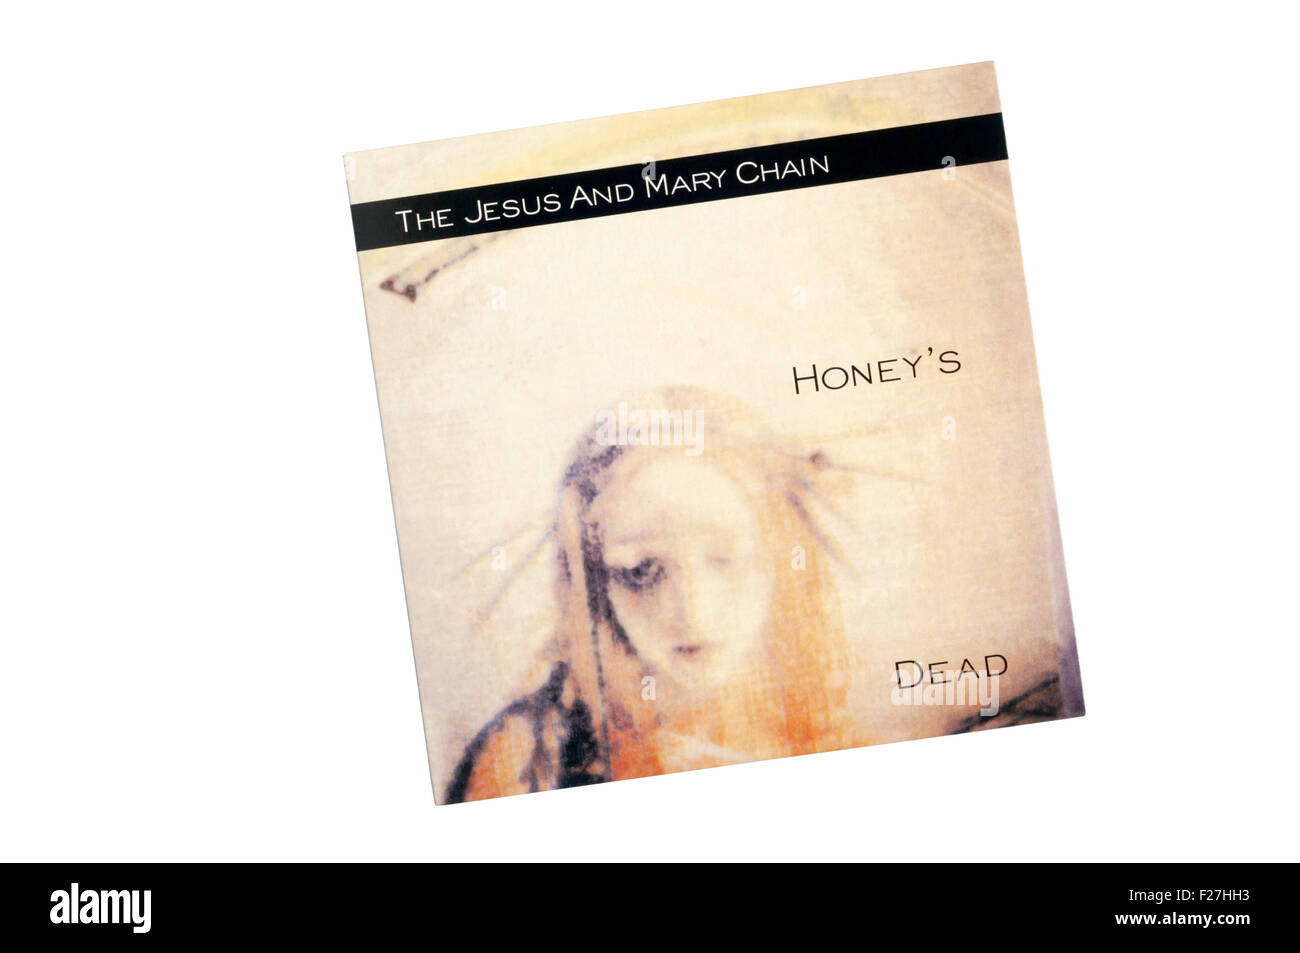 Honey's Dead was the fourth studio album by Scottish alternative rock band The Jesus and Mary Chain, released in 1992. Stock Photo